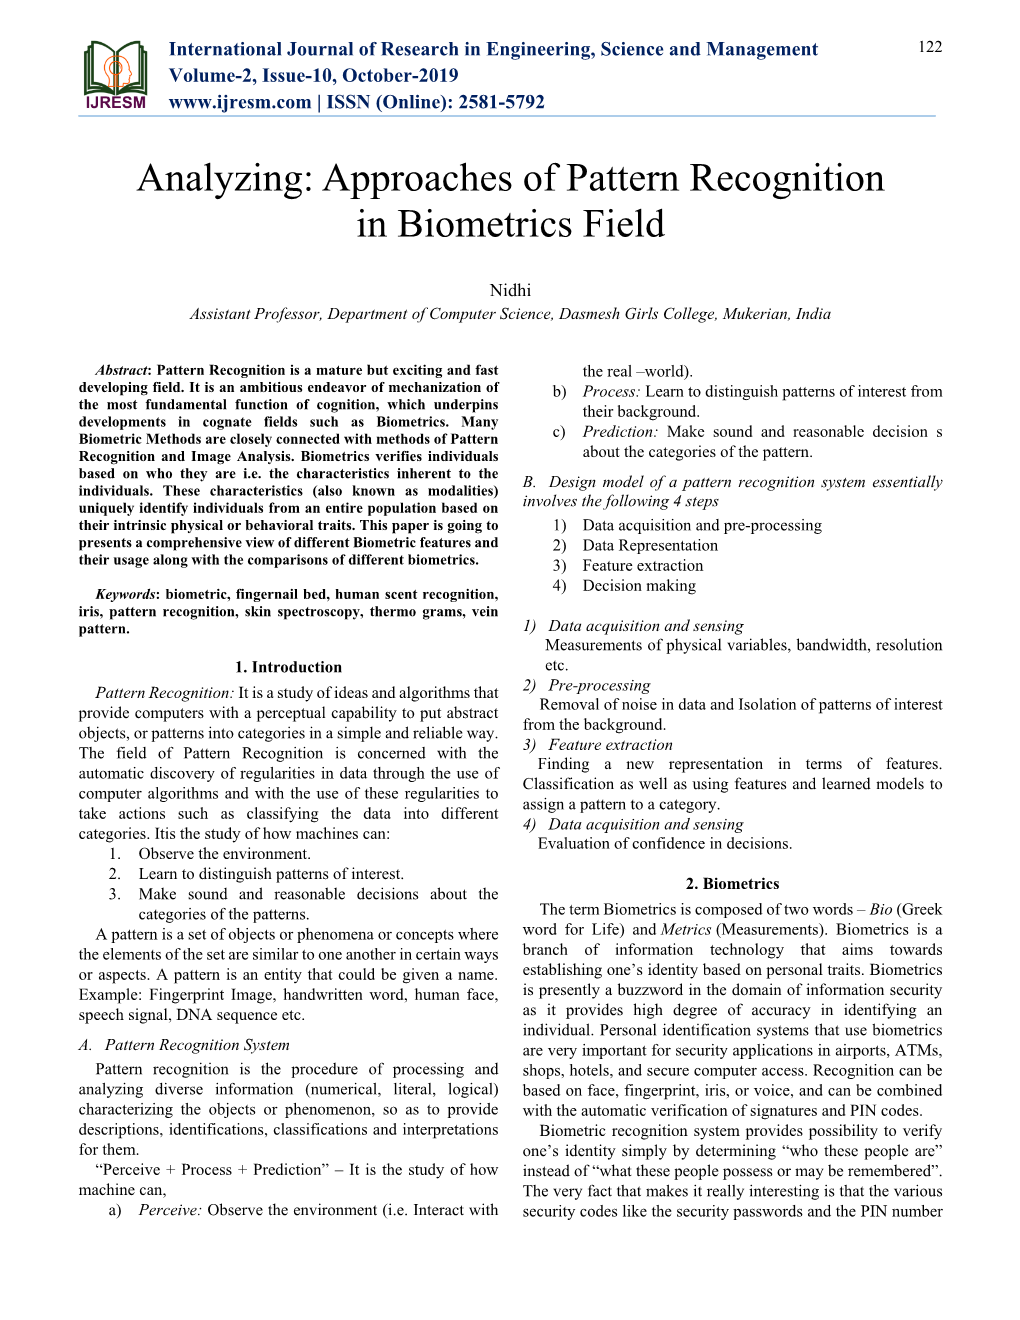 Analyzing: Approaches of Pattern Recognition in Biometrics Field